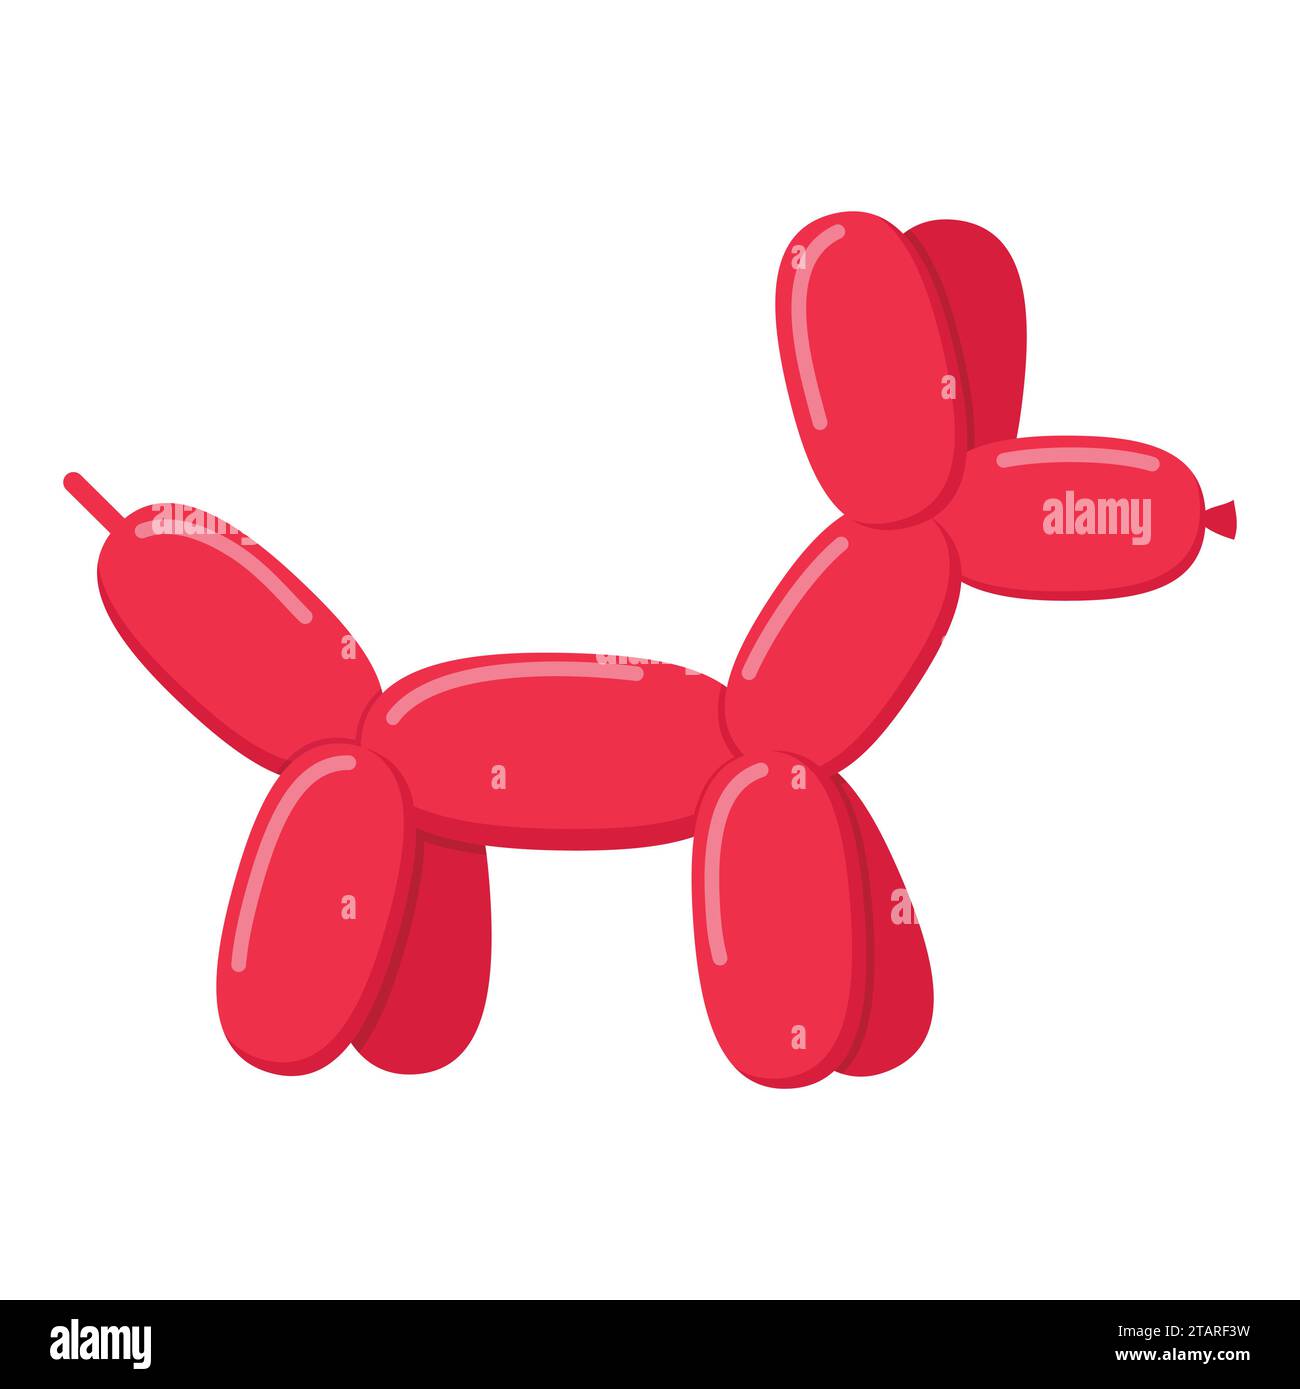 Red ballon dog isolated on white background. Cute bubble animal dog toy in flat style. Vector illustration Stock Vector